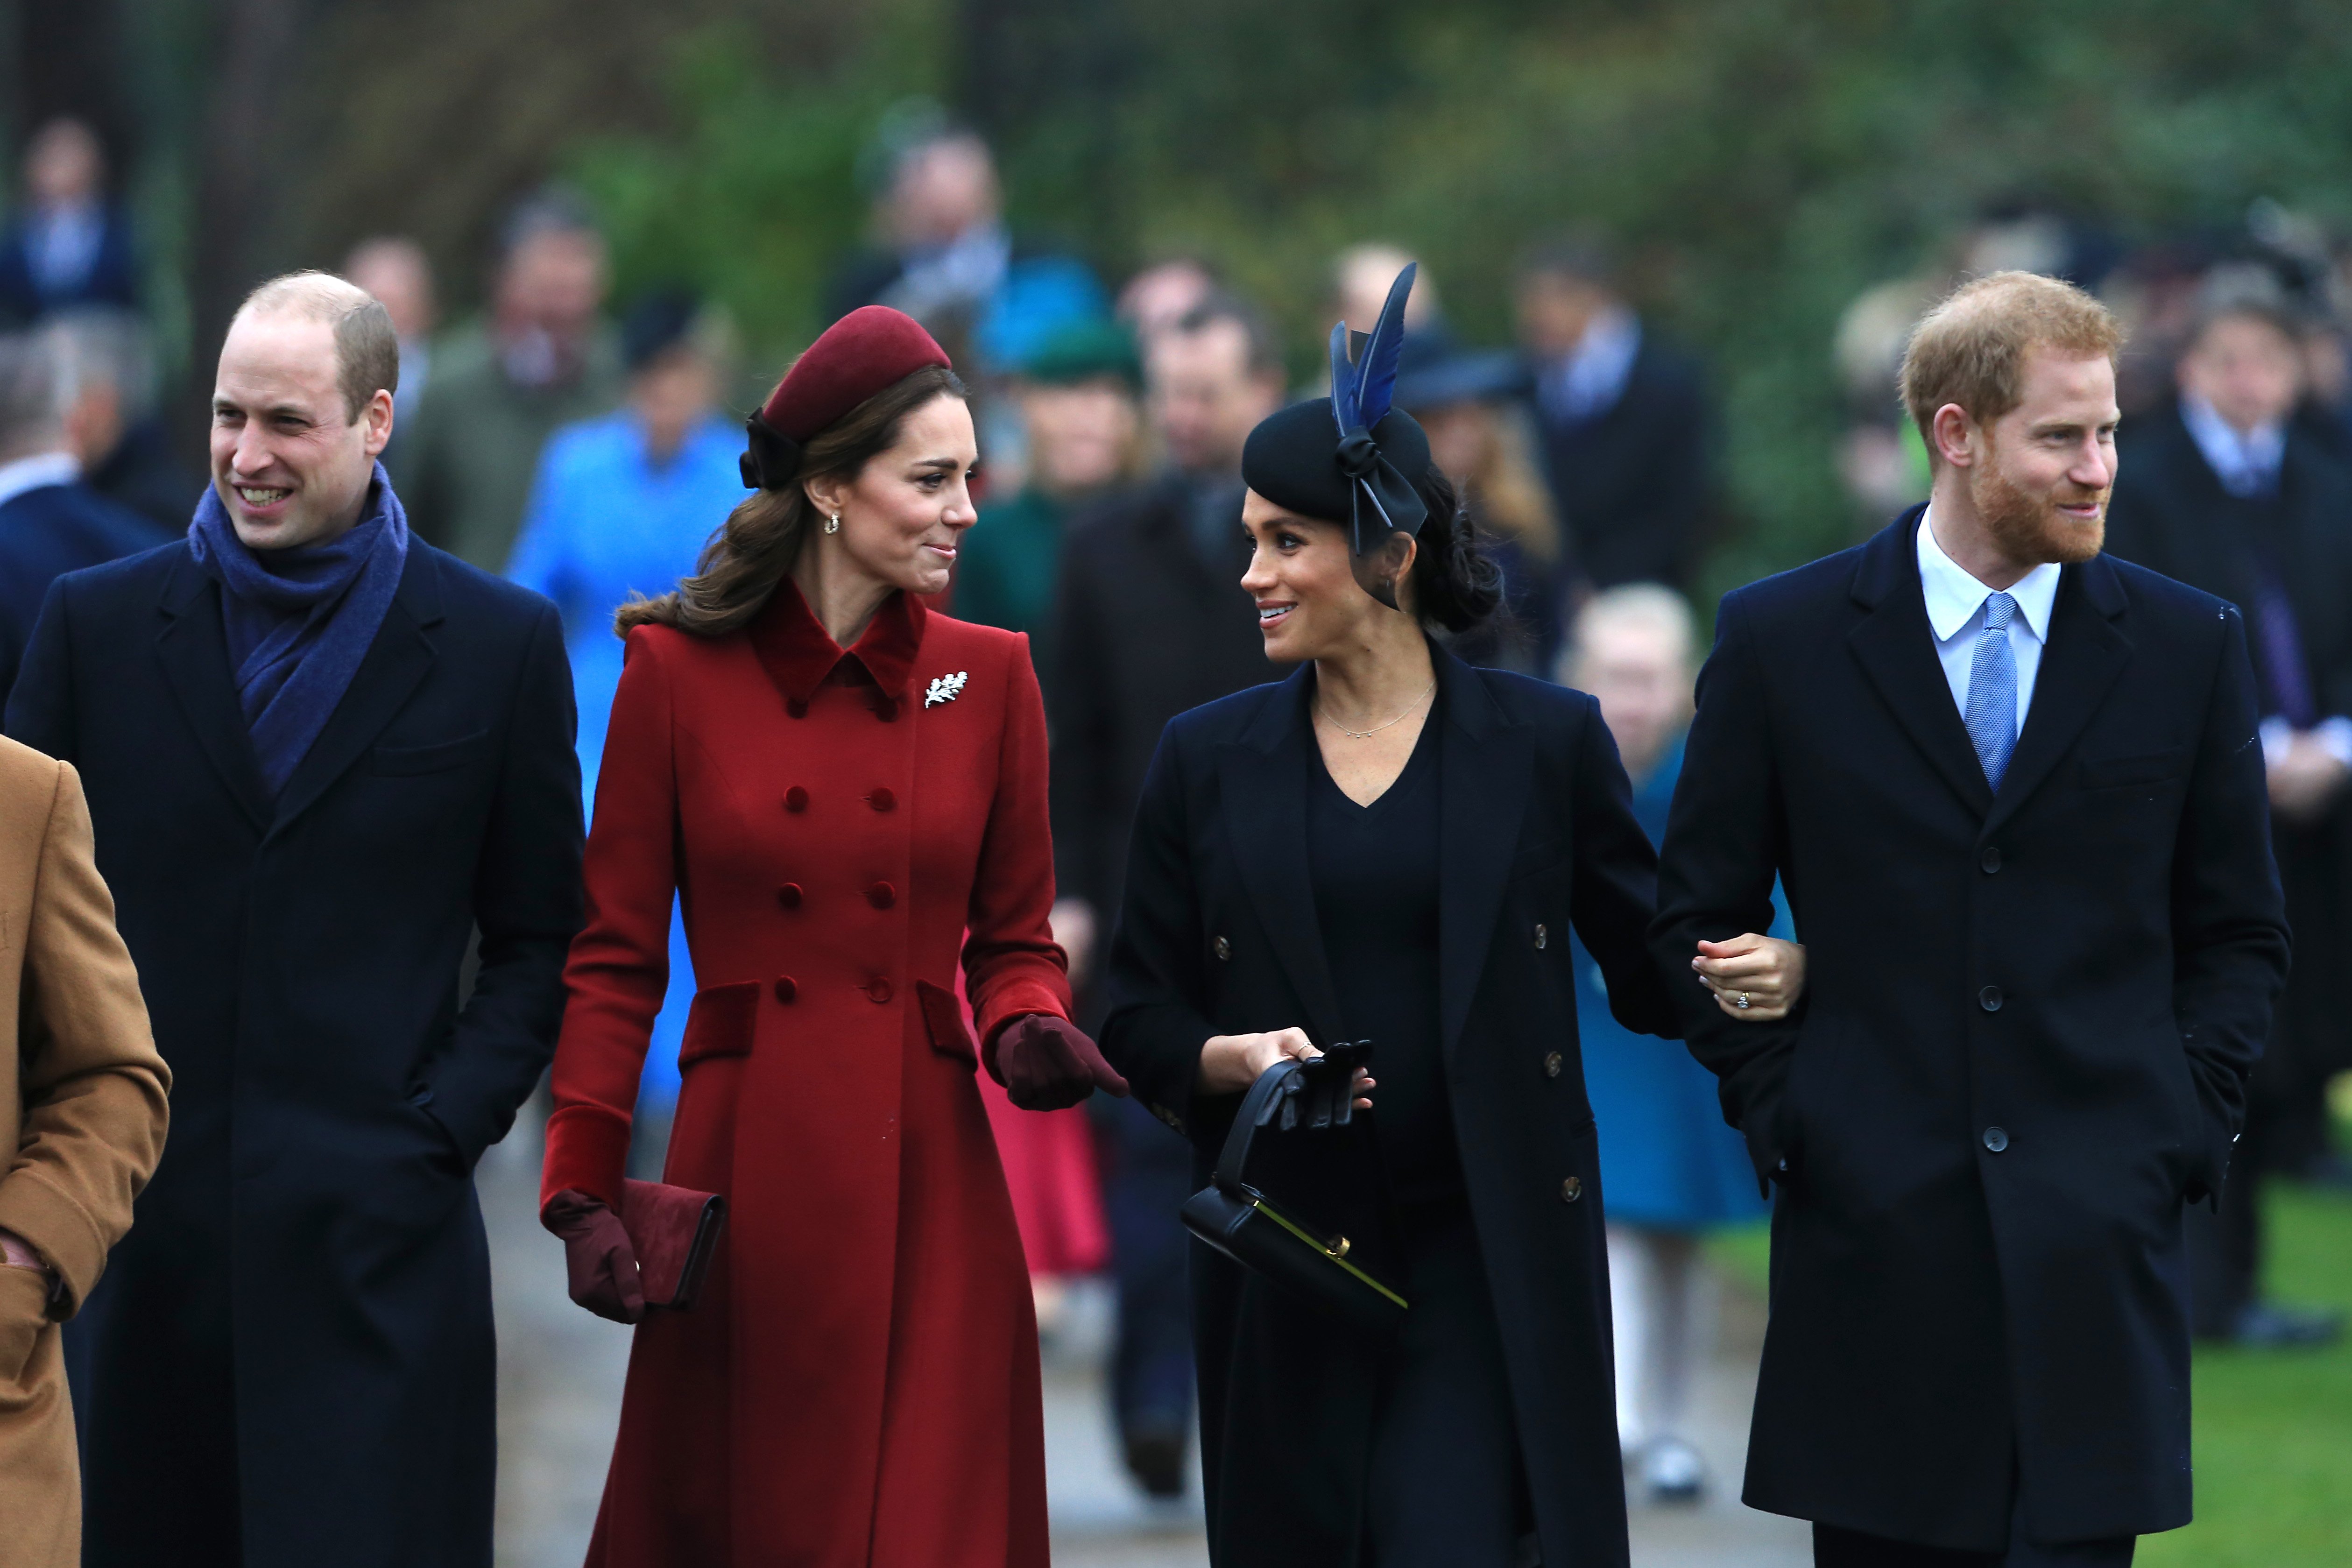 Prince William, Catherine, Meghan and Prince Harry, Duke of Sussex arrive to attend Christmas Day Church service at Church of St Mary Magdalene on the Sandringham estate on December 25, 2018. | Photo: Getty Images